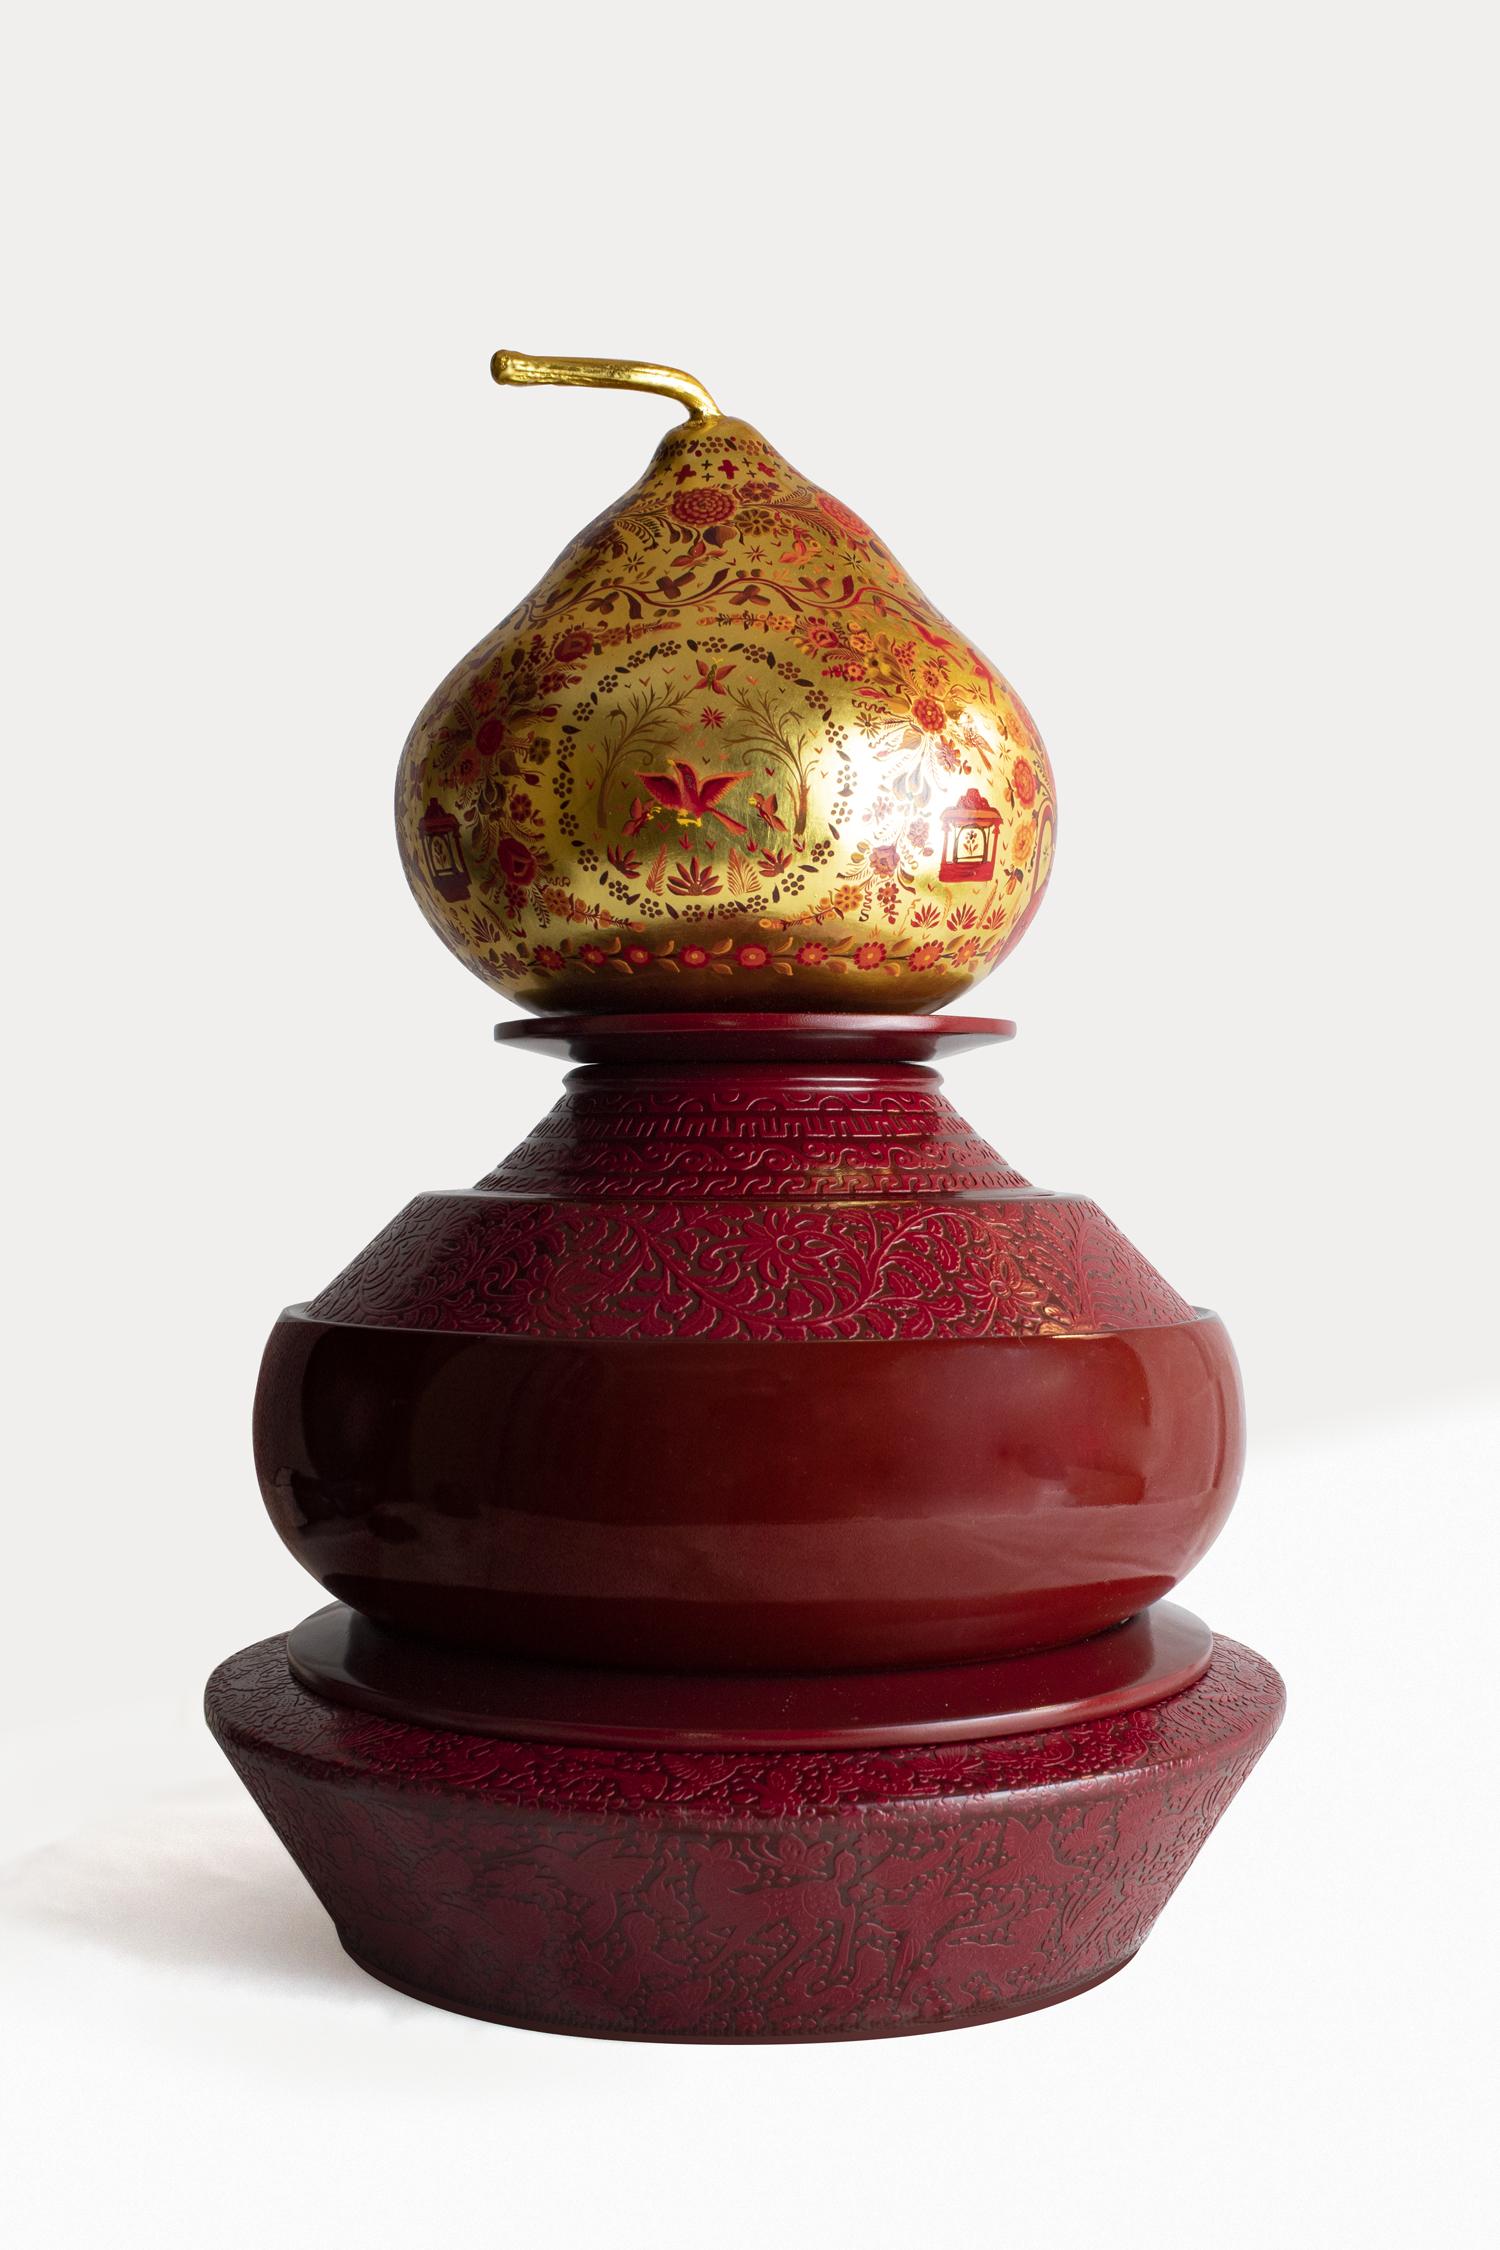 Three urns, two trays, one gourd.
Turned solid tzalam (wild tamarind) wood; maque and lacquer carving; gold leaf; oil painting.

Commemoration, ceremony, and veneration of the ancestral are acts of a deeply personal, familial nature. Far removed